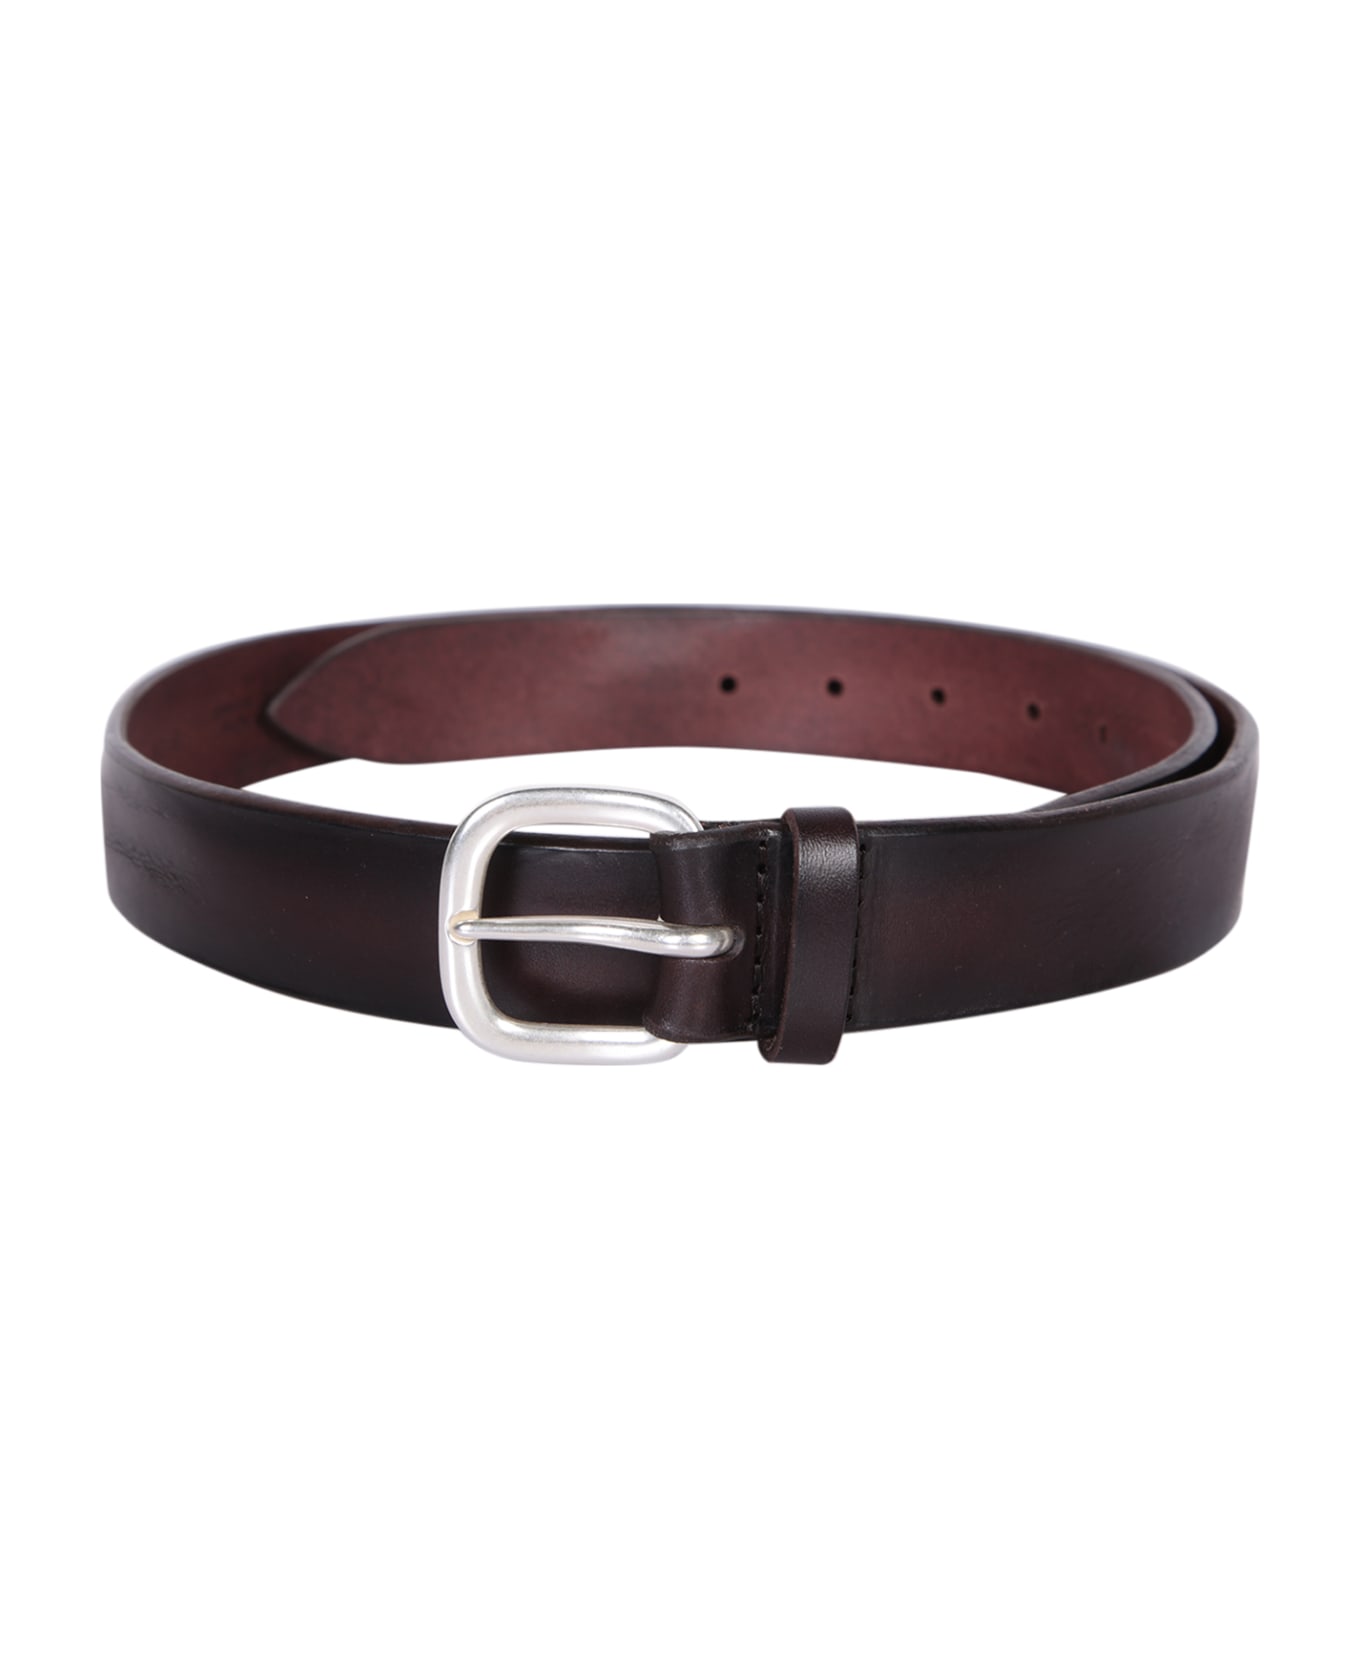 Orciani Bull Soft Brown Belt - Brown